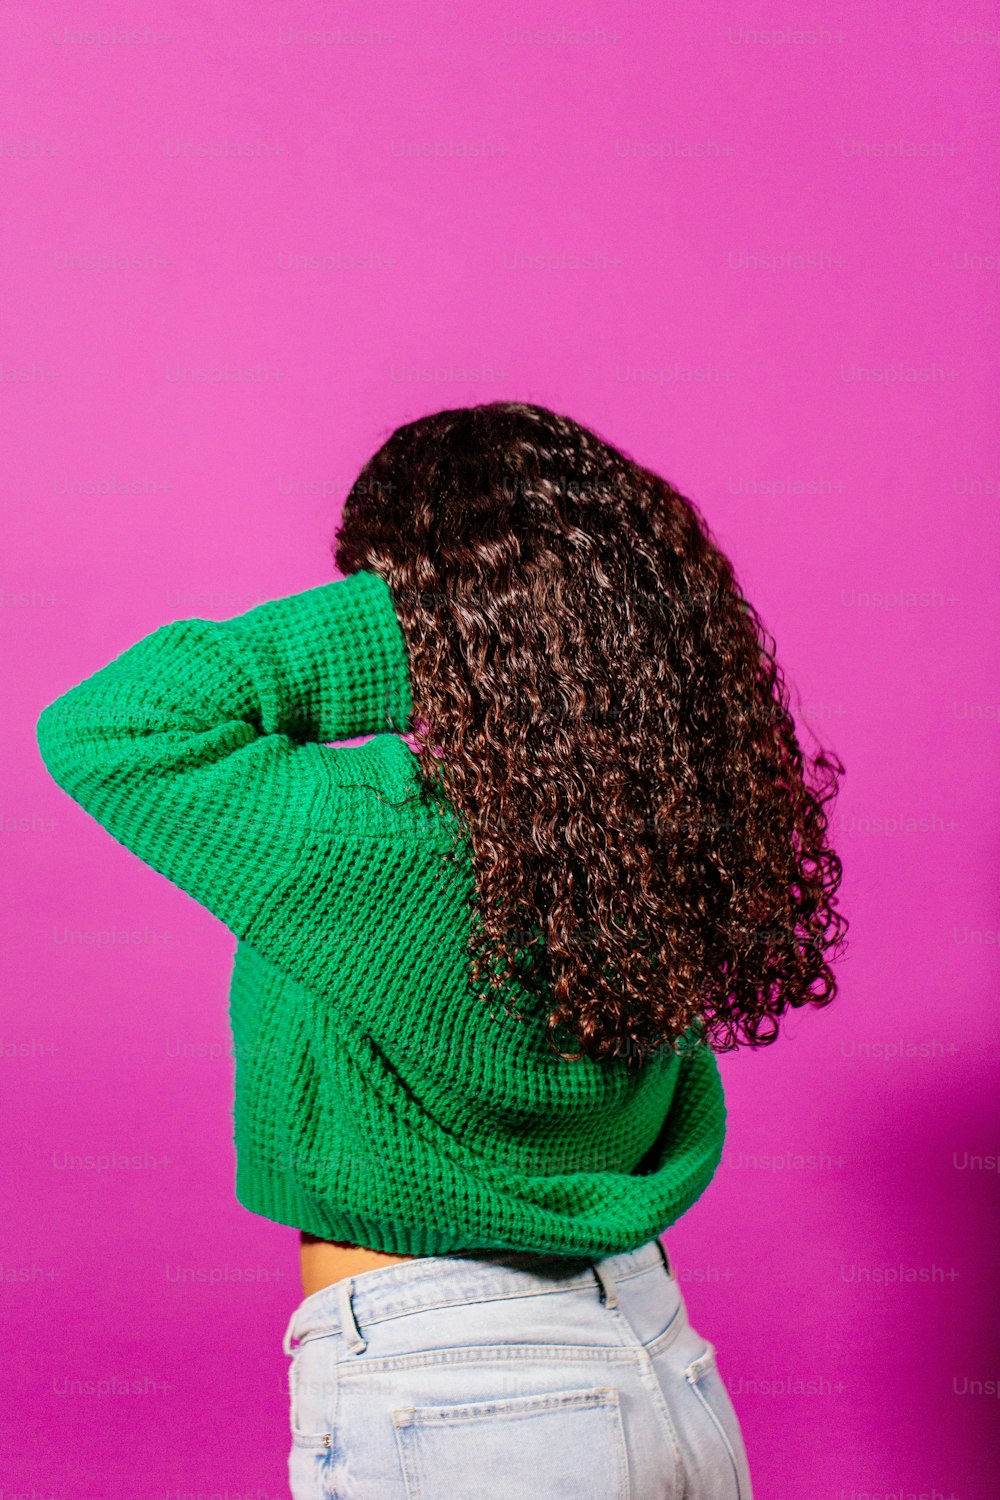 a woman with curly hair wearing a green sweater